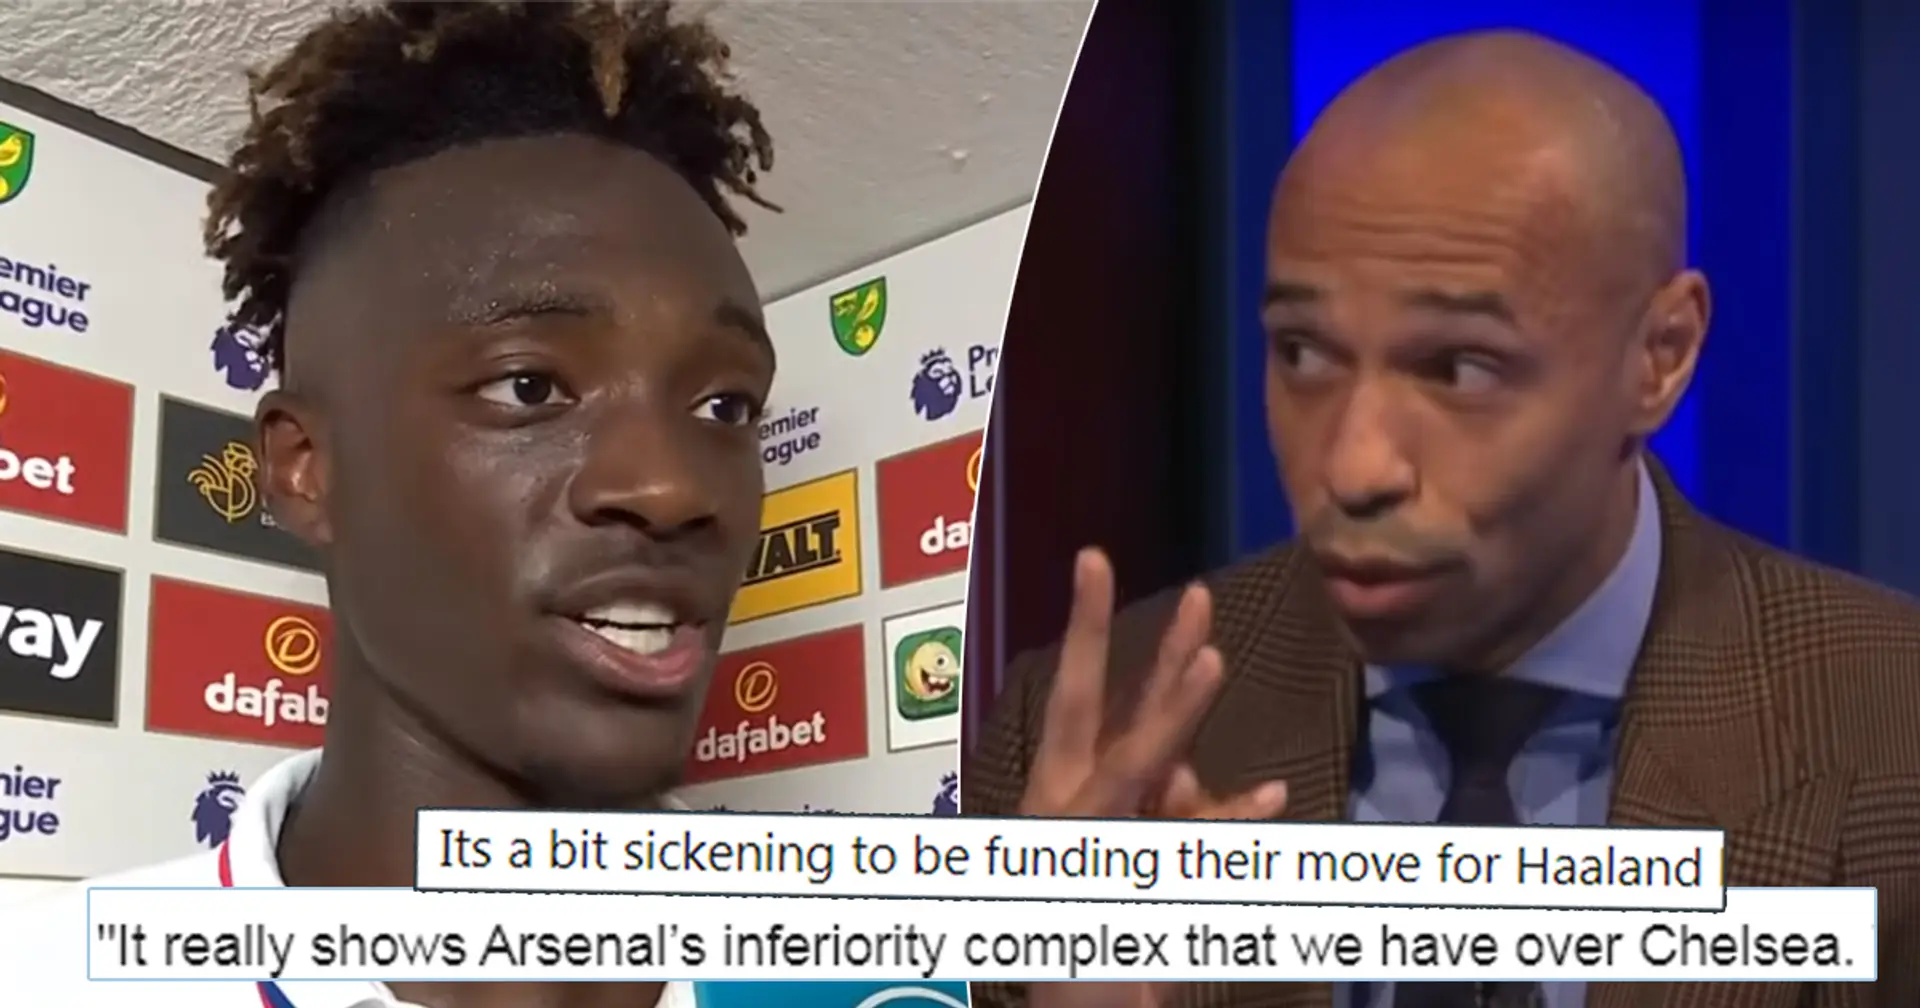 'Why do we have to buy Chelsea leftovers?': Arsenal fans shocked by Tammy Abraham links